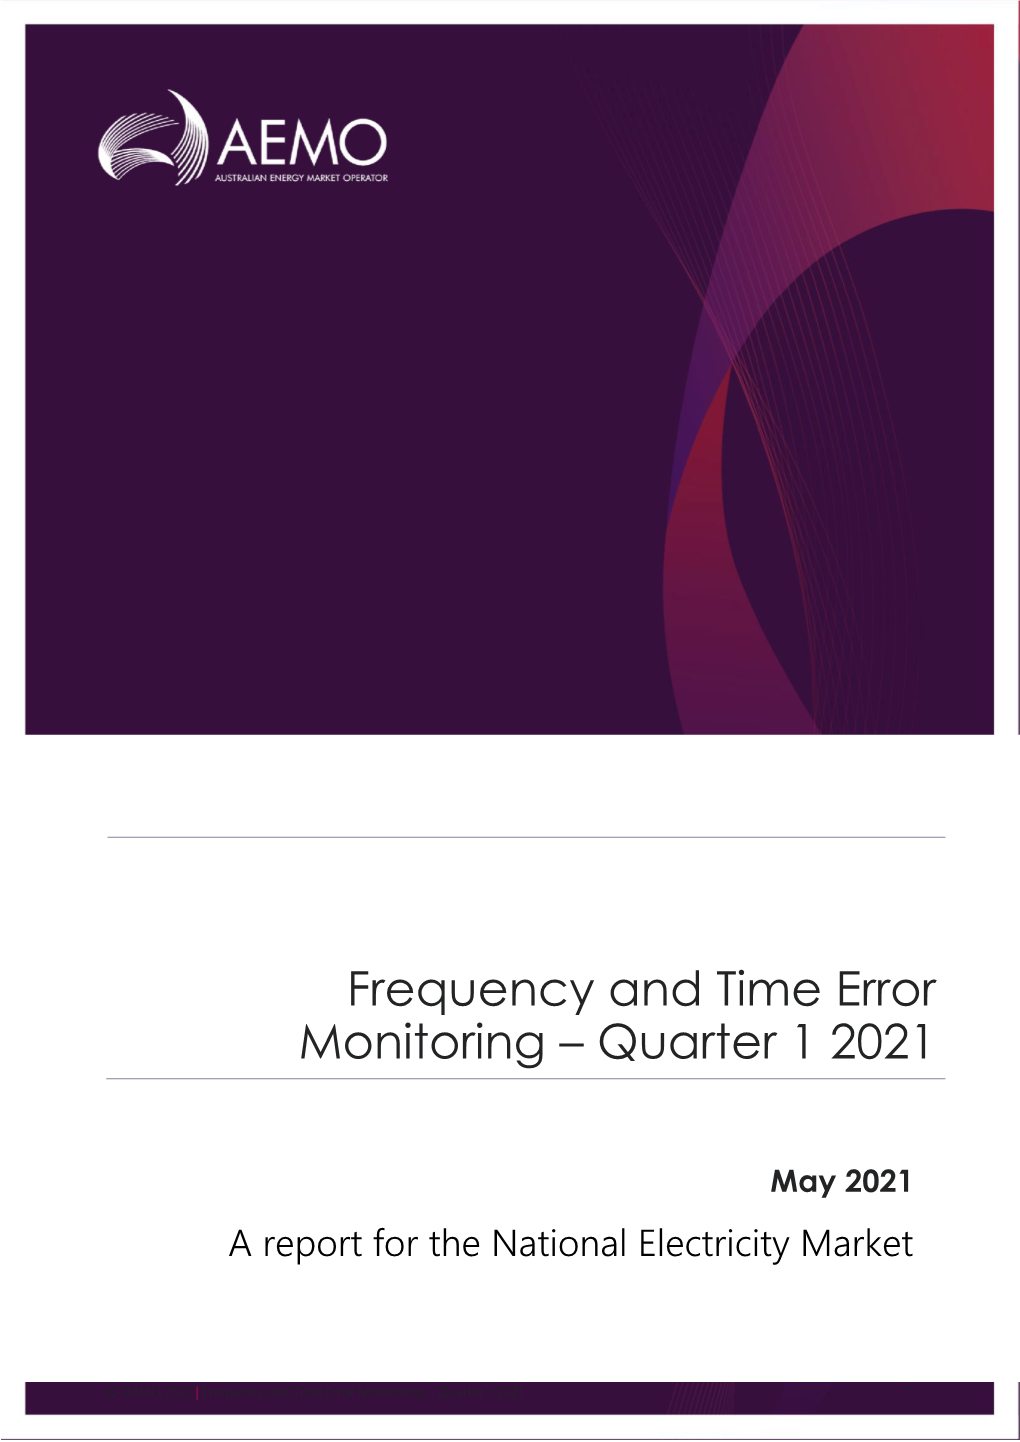 Frequency and Time Error Monitoring Quarter 1 2021